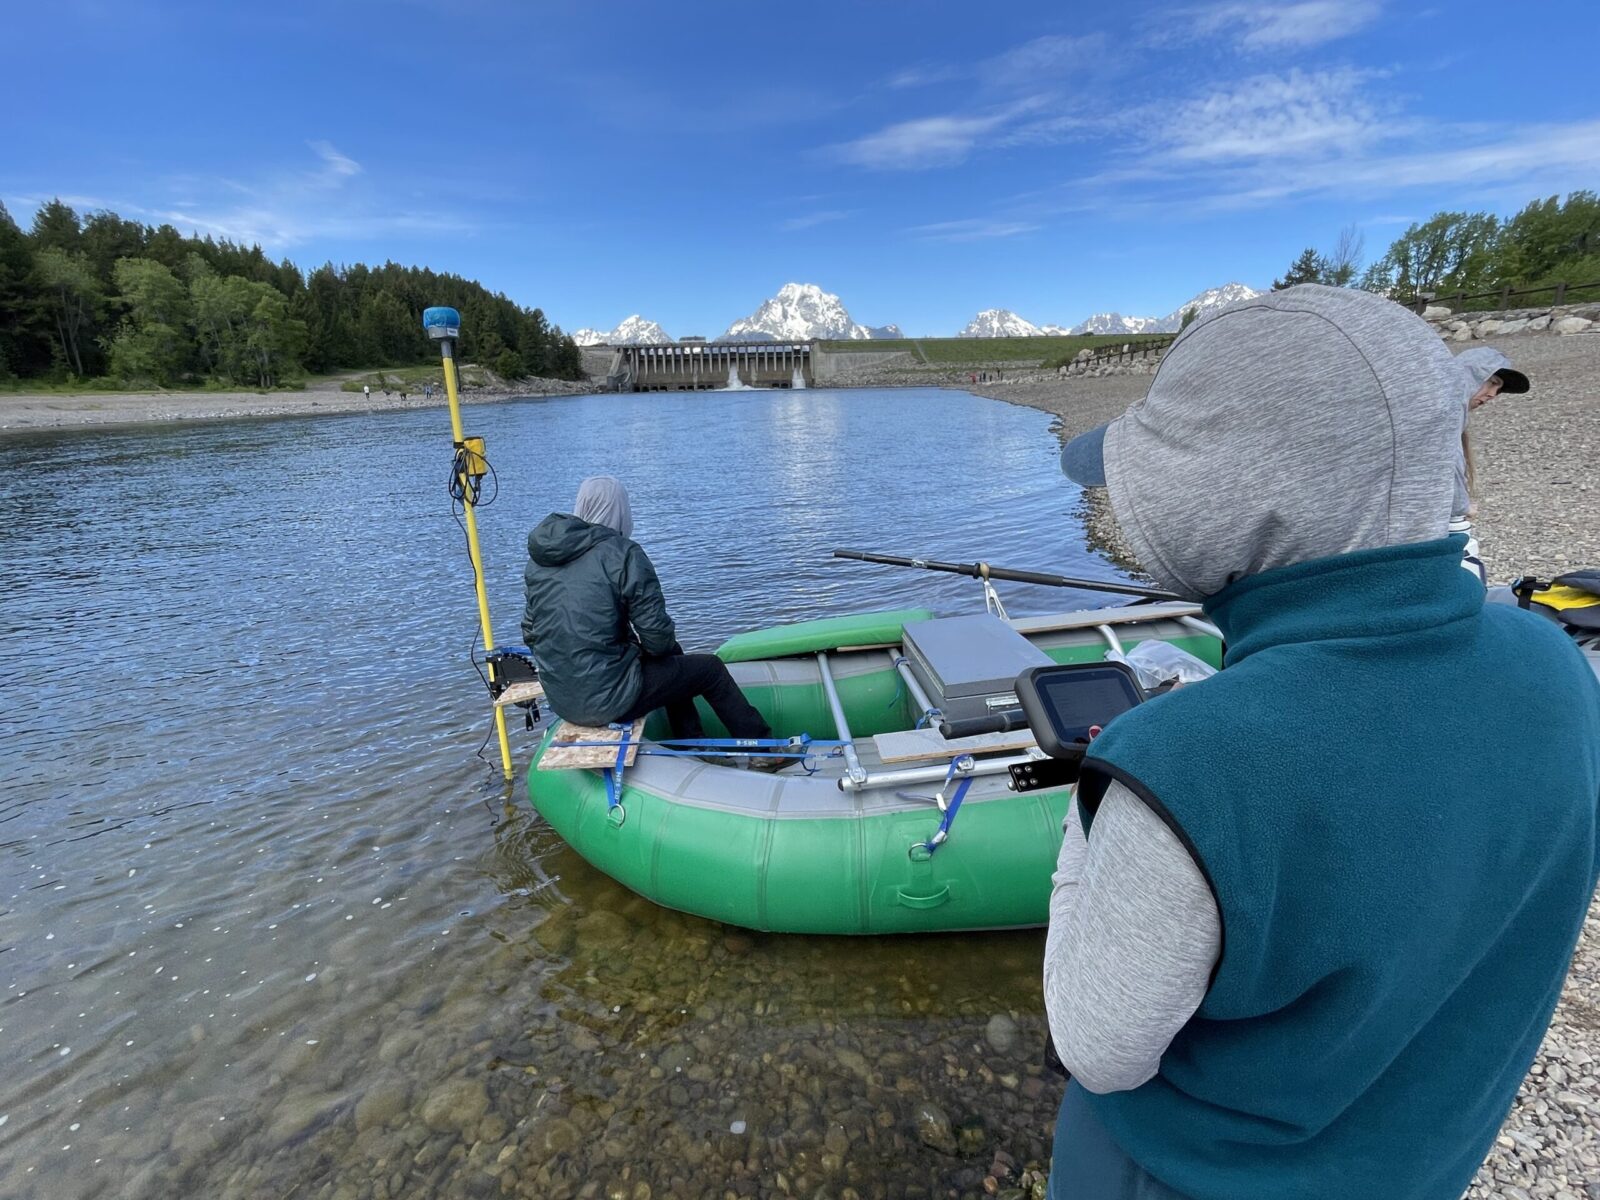 Park staff conducting research on the Snake River.